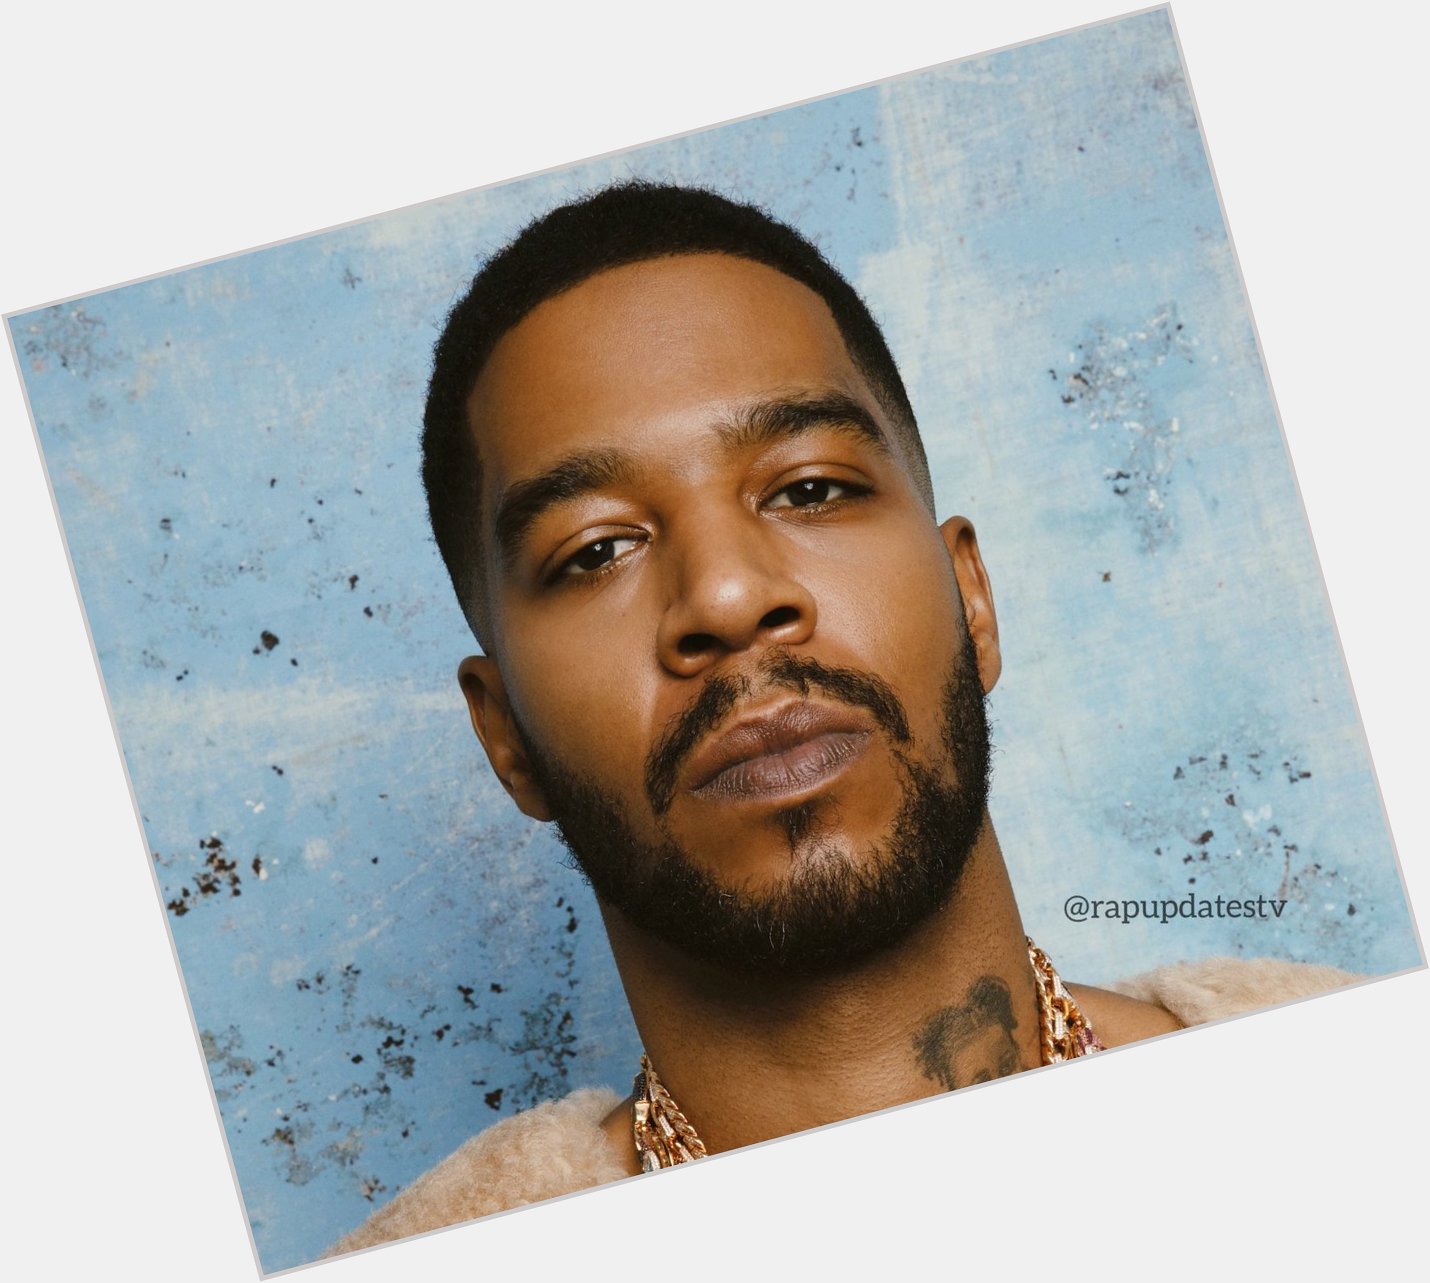 Happy birthday to Kid Cudi, he turns 37 years old today! 